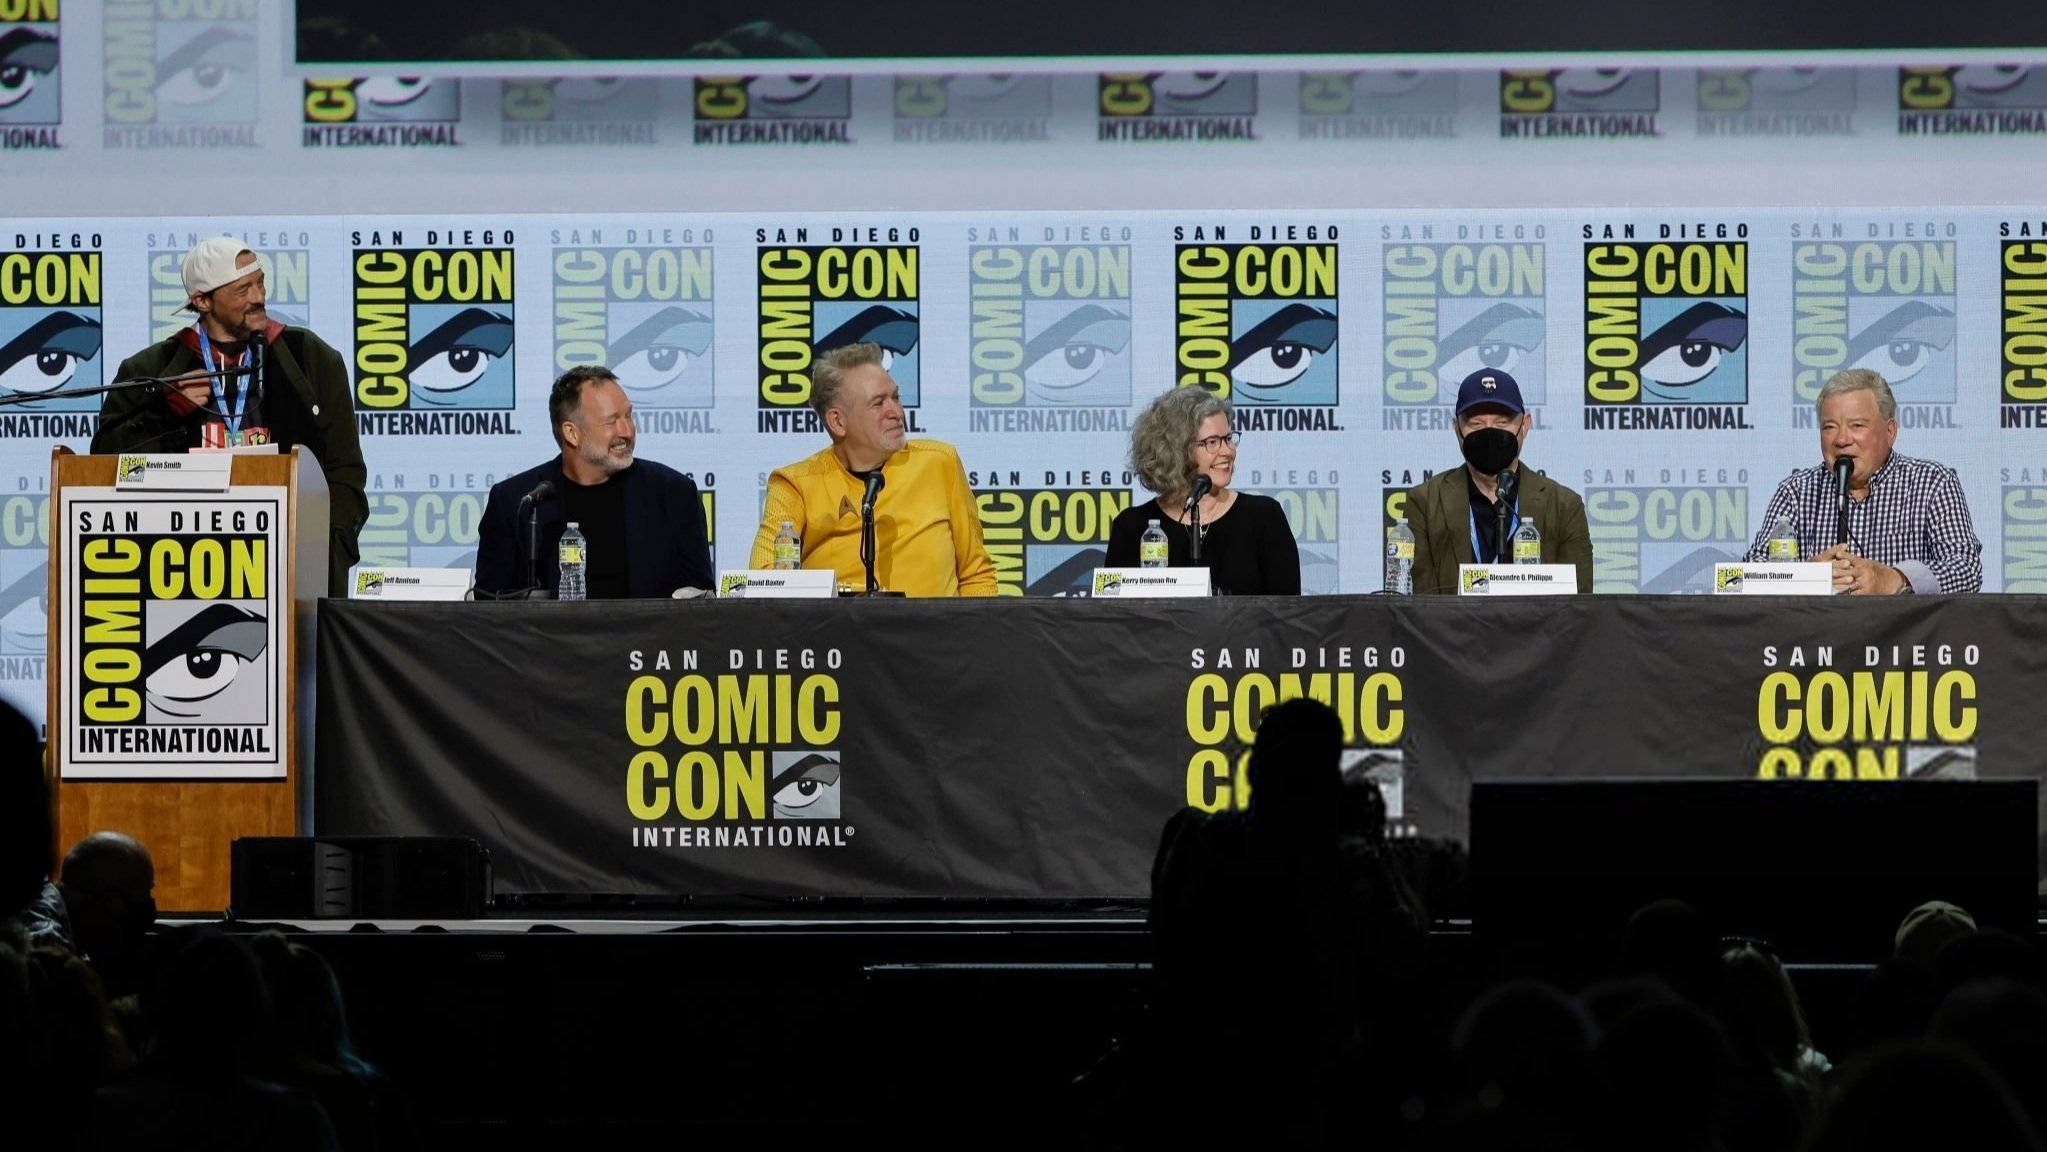  From left to right: Kevin Smith, Jeff Annison, David Baxter, Kerry Deignan Roy, Alexandre O. Philippe, and William Shatner.   Photo credit: Kevin Winter / Getty Images 